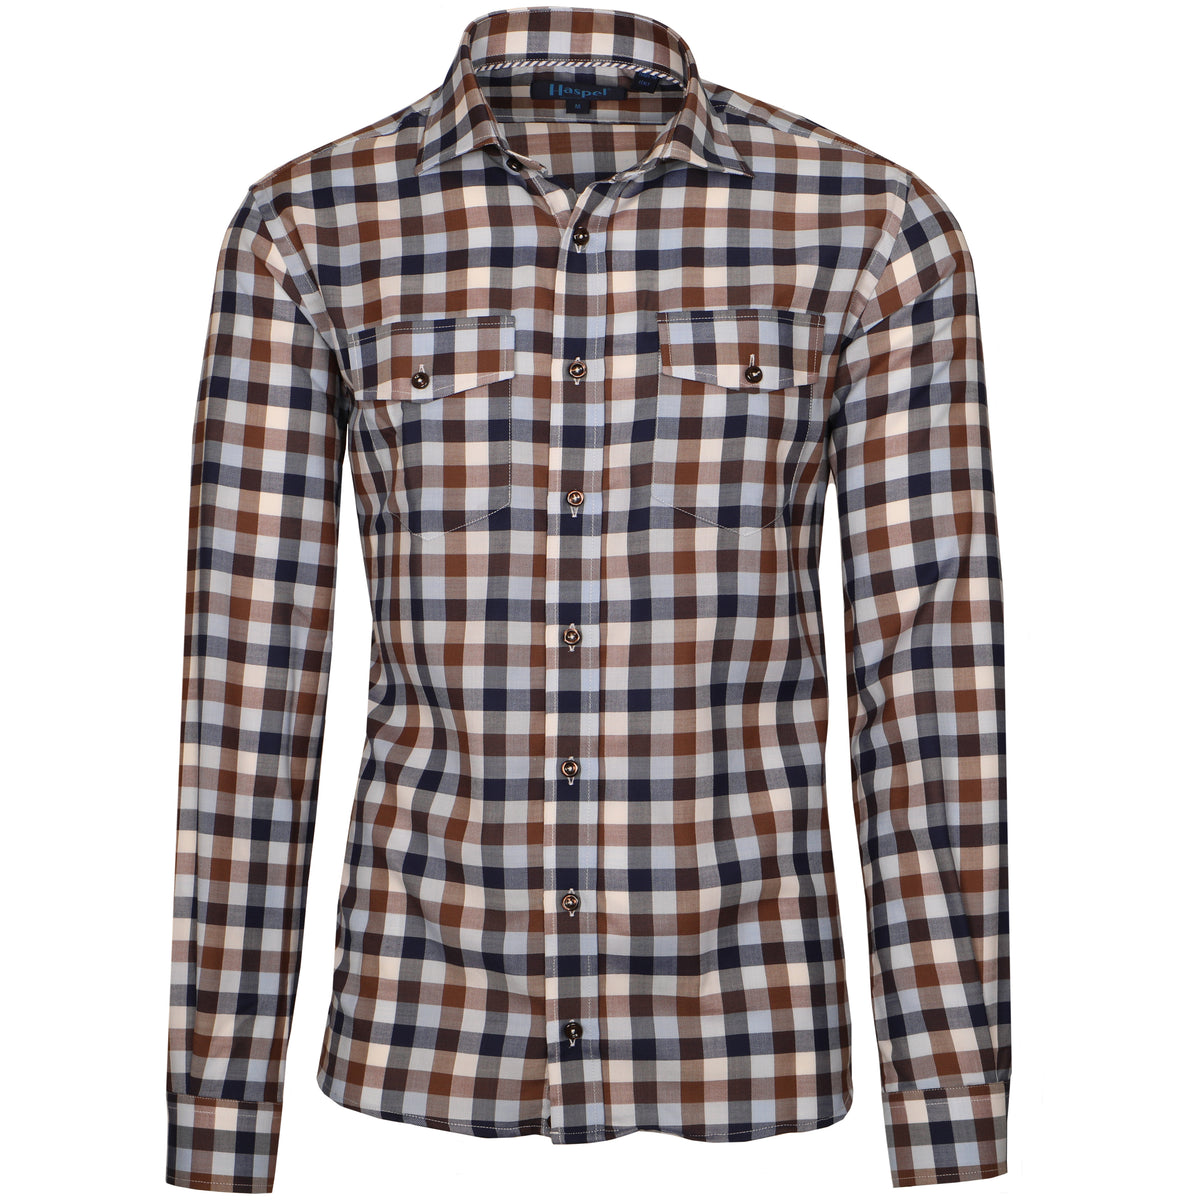 A check to make any true woodsmen proud. Deep chestnuts and cooling blues to keep you looking fresh all season long.   100% Cotton  •  Long Sleeve  •  Spread Collar  •  Two Pockets  •  Machine Washable  •  Made in Italy Return Policy